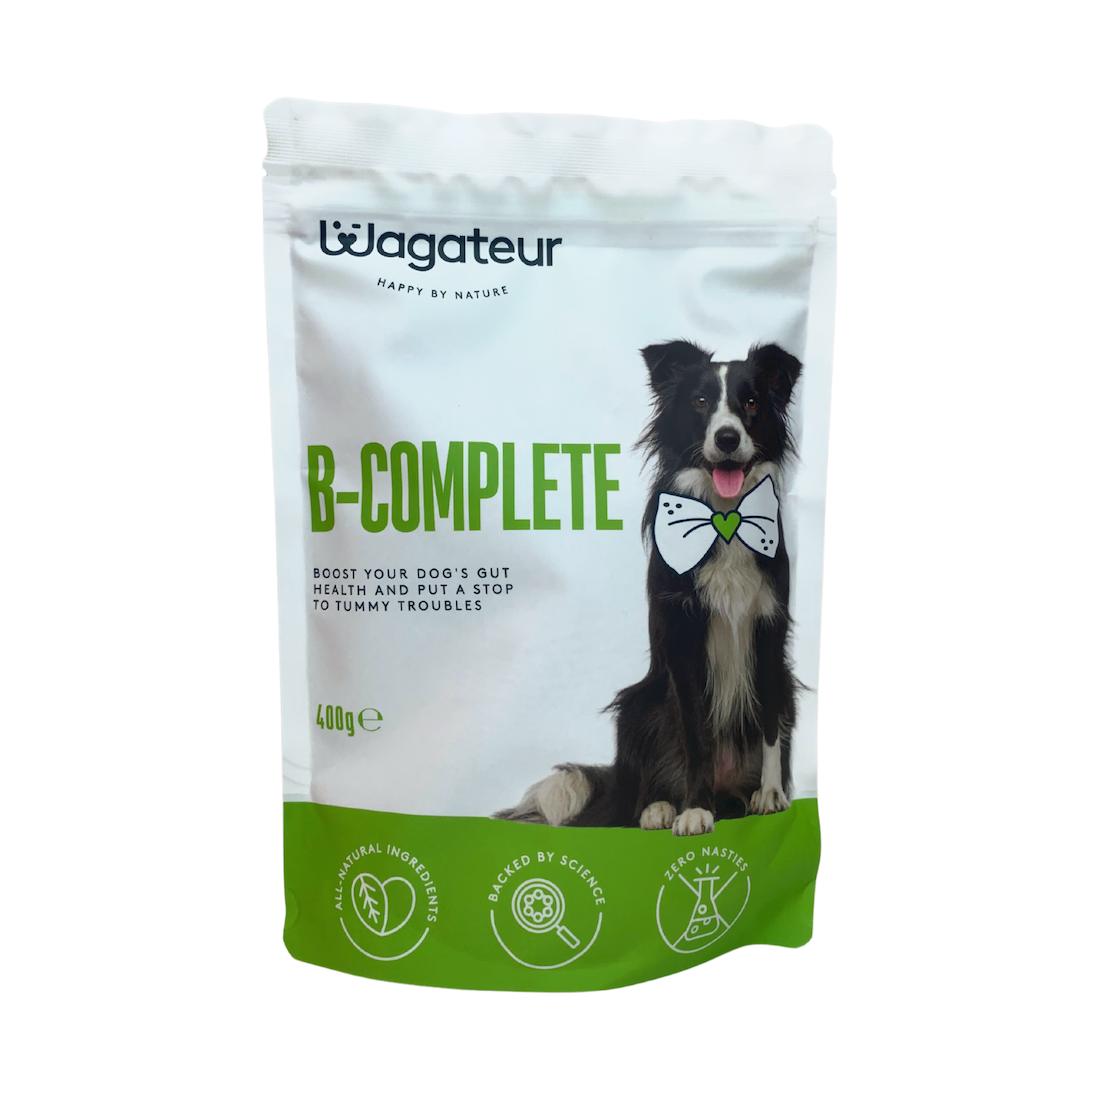 B-Complete Natural Weight Management Supplement for Dogs